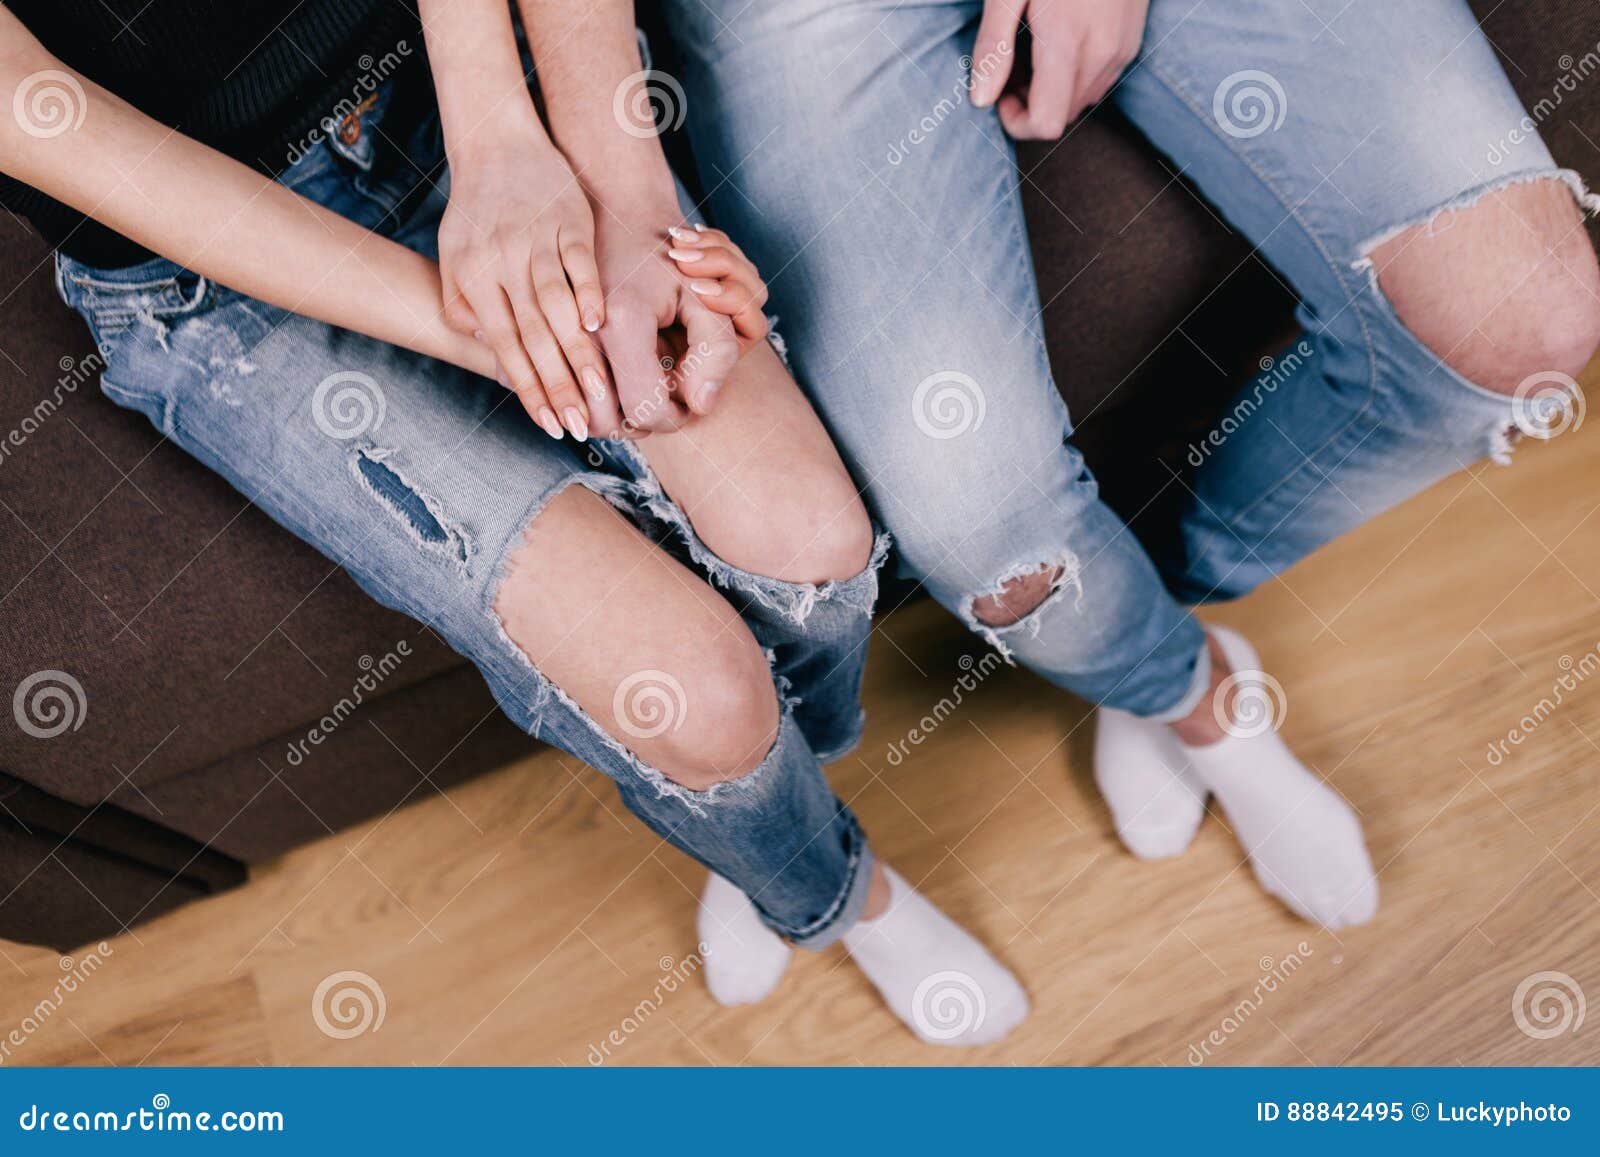 Shy Lovers Sitting Together on Brown Bed Stock Image